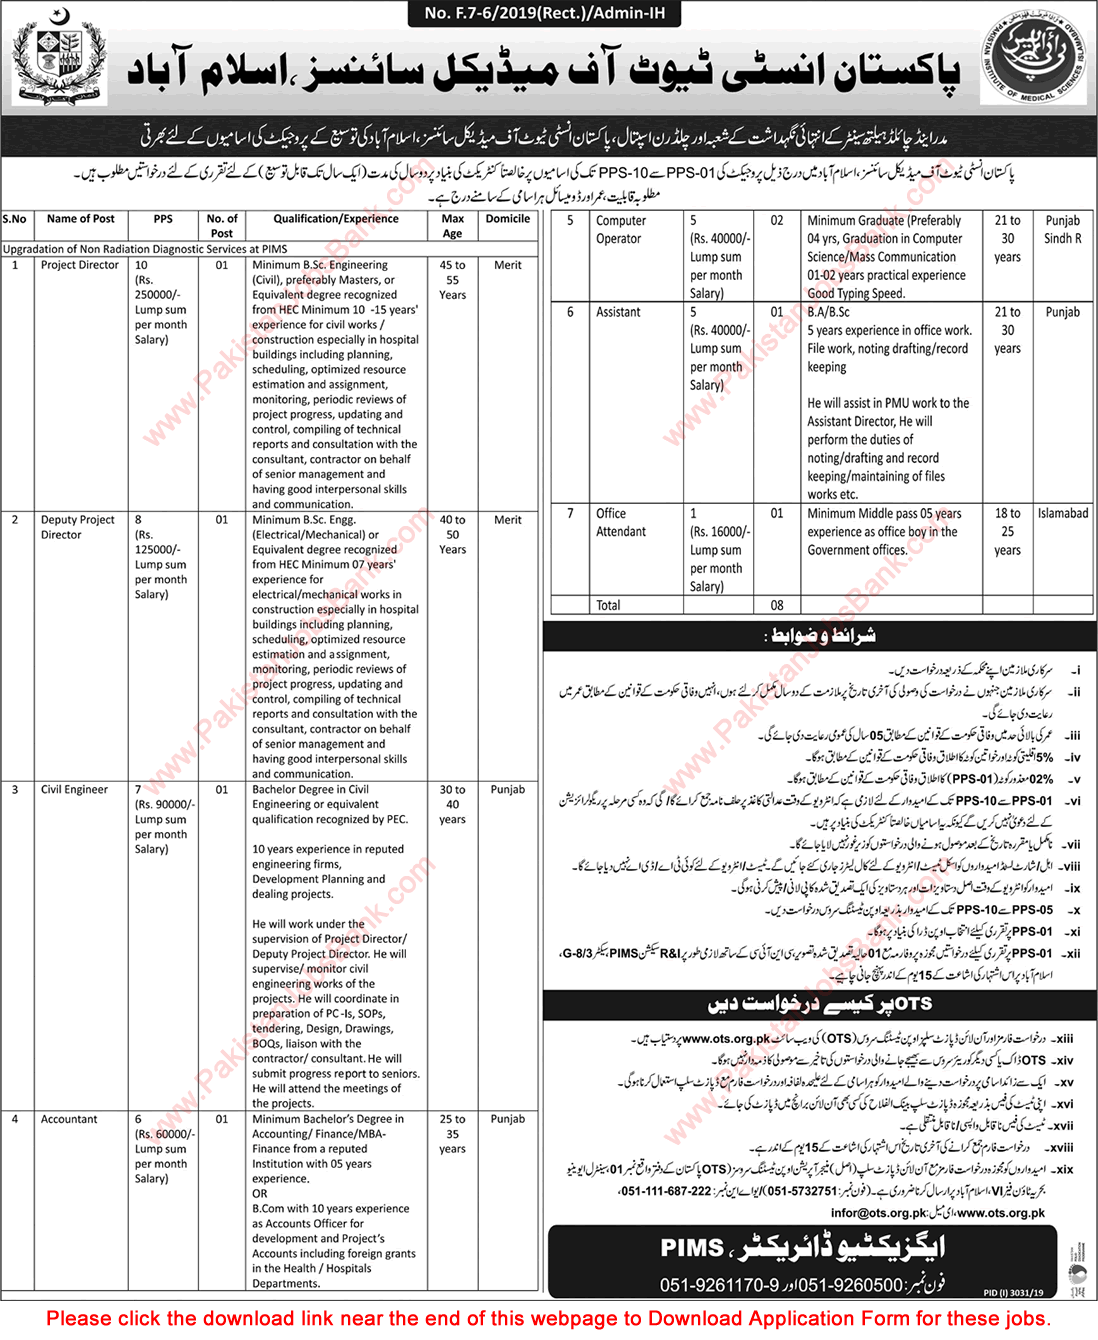 PIMS Hospital Islamabad Jobs December 2019 OTS Application Form Pakistan Institute of Medical Sciences Latest